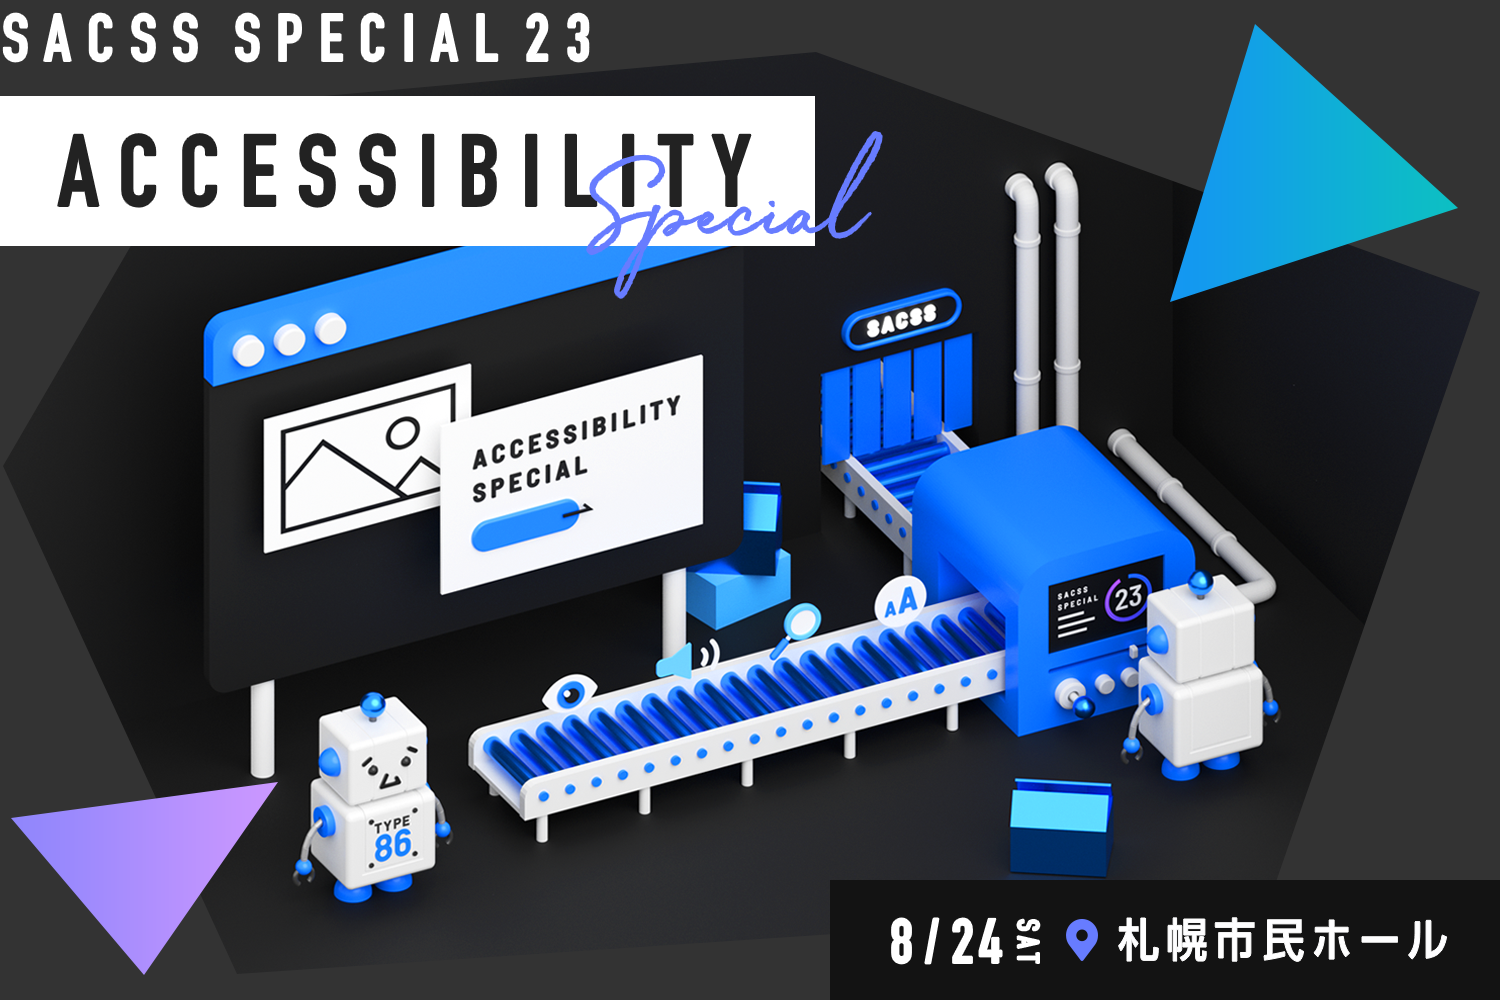 SaCSS 2019年8月24日『SaCSS Special23 : Accessibility』